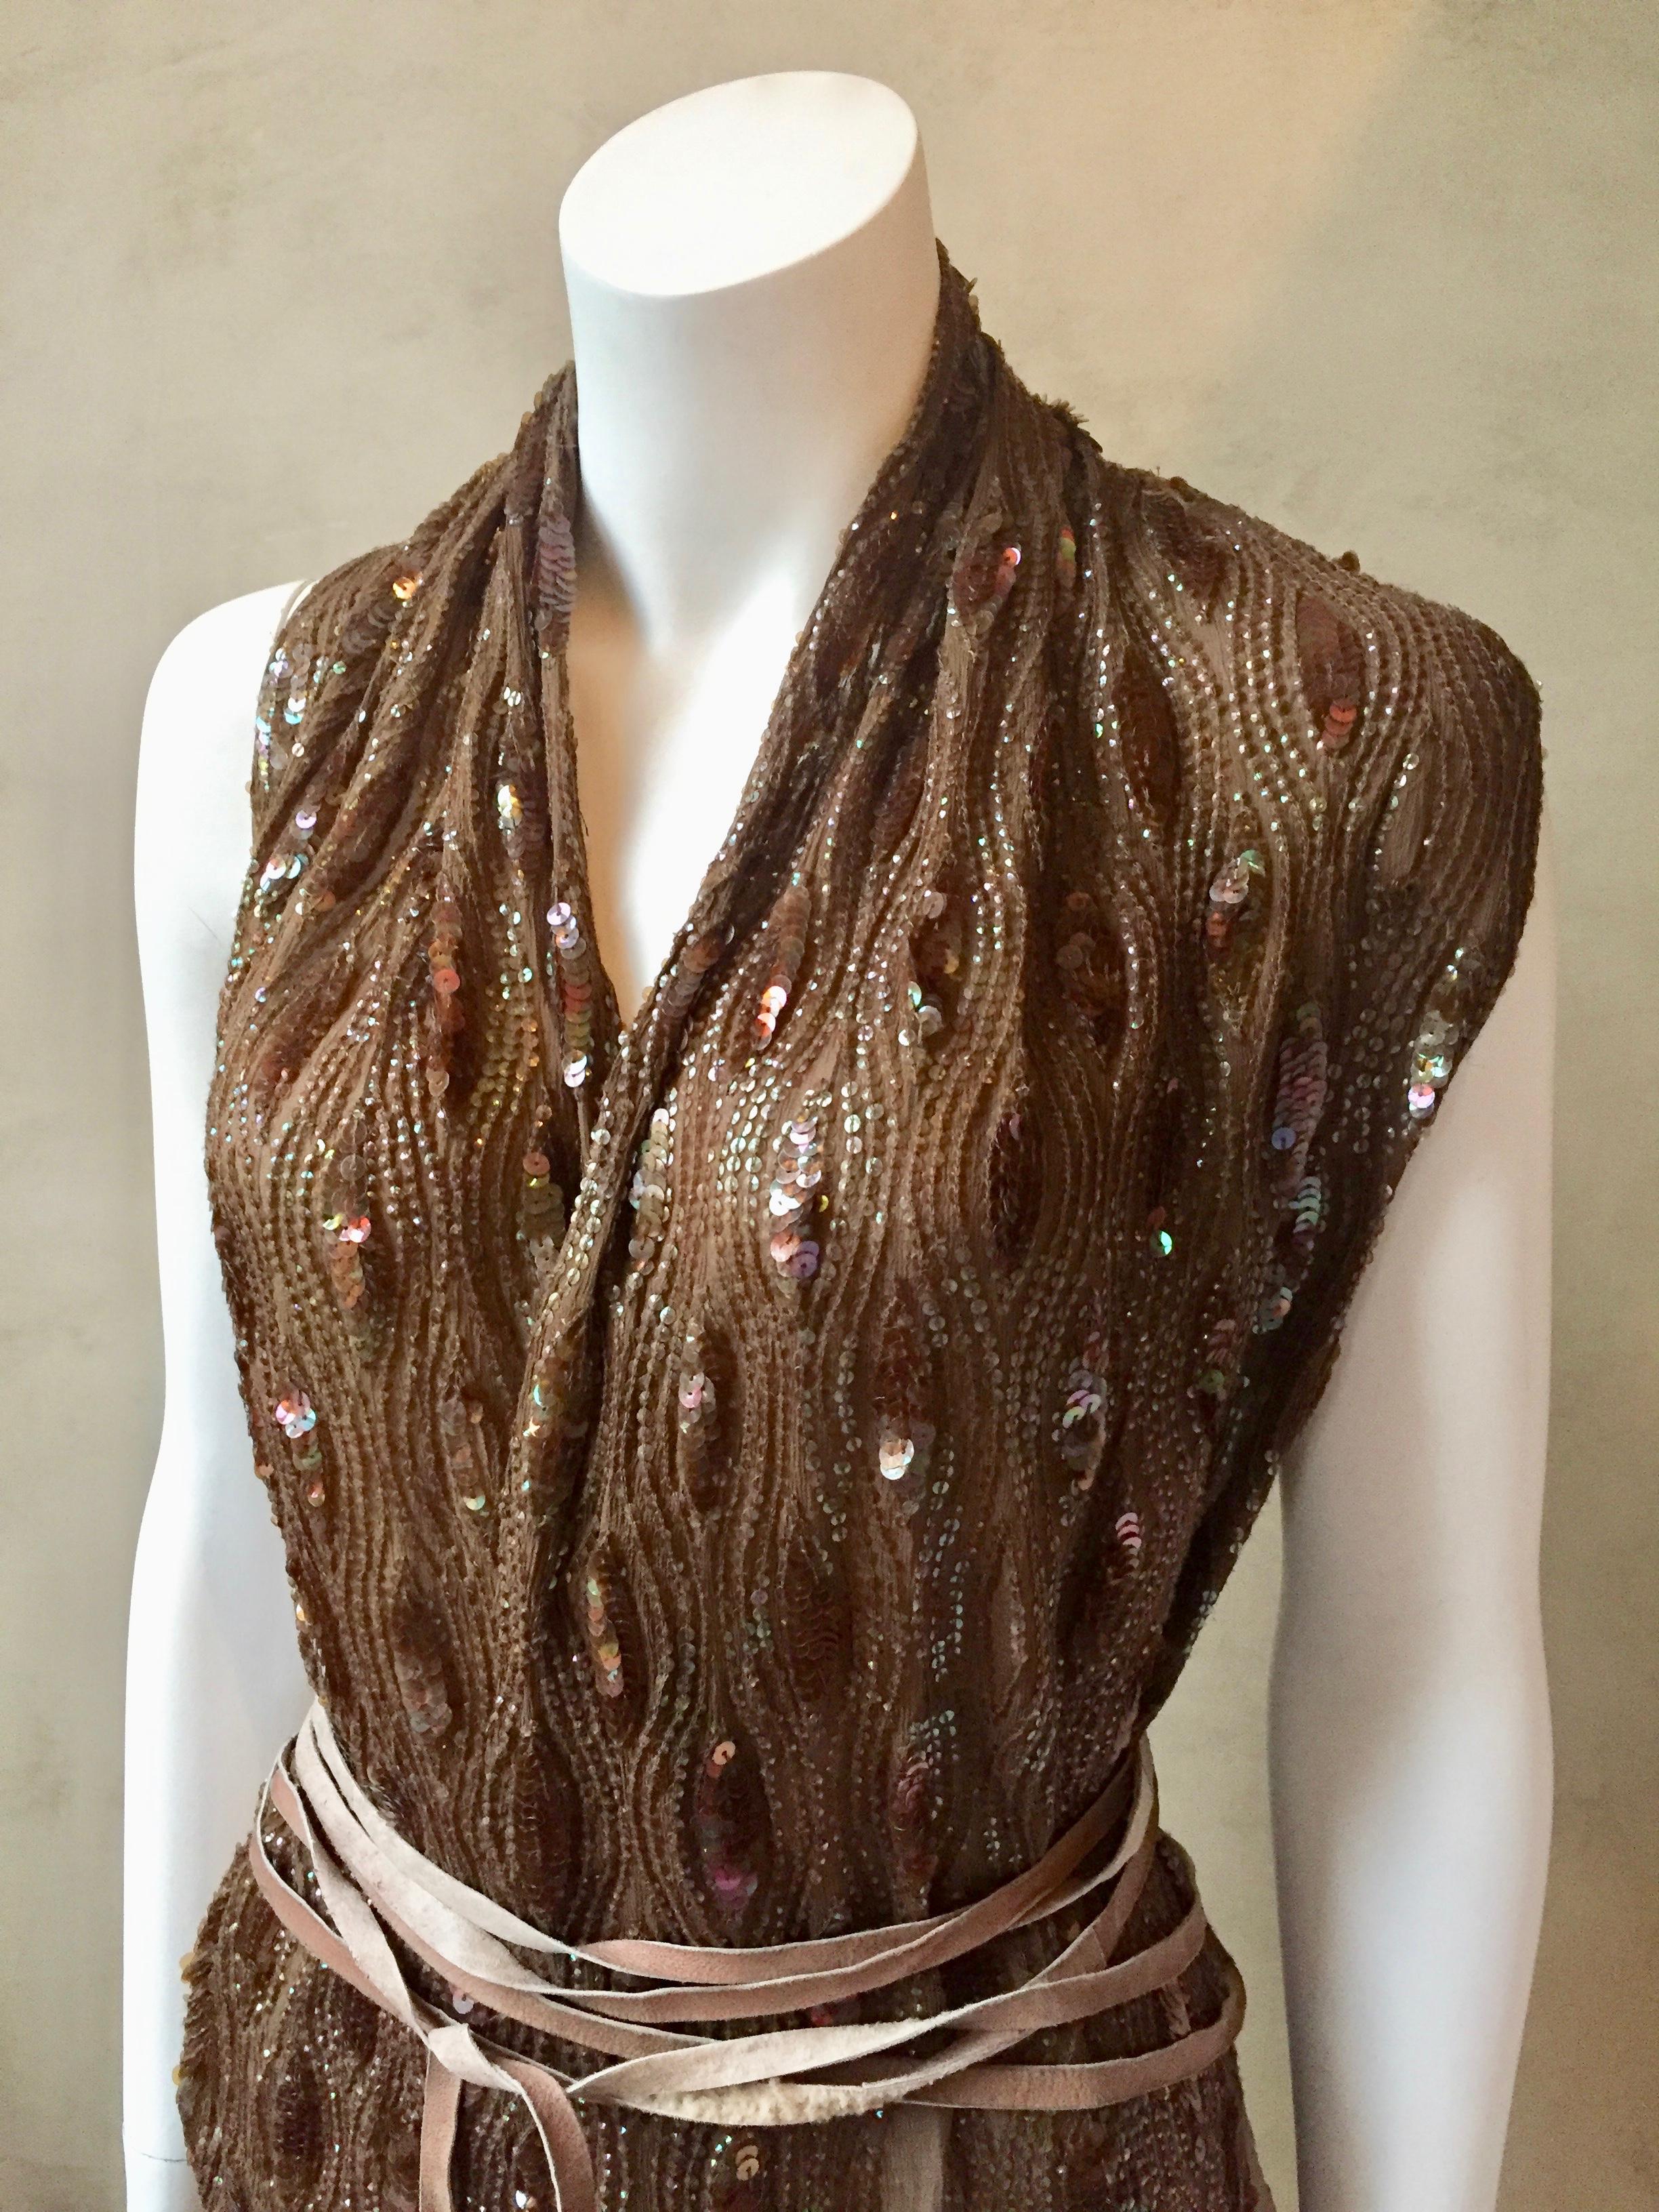 Ann Demeulemeester Taupe brown silk chiffon wrap top/vest embroidered with opalescent taupe sequins and wrapped with a leather belt.  The front is asymmetrical and can be worn open or closed and wrapped around multiple times with the very long thin